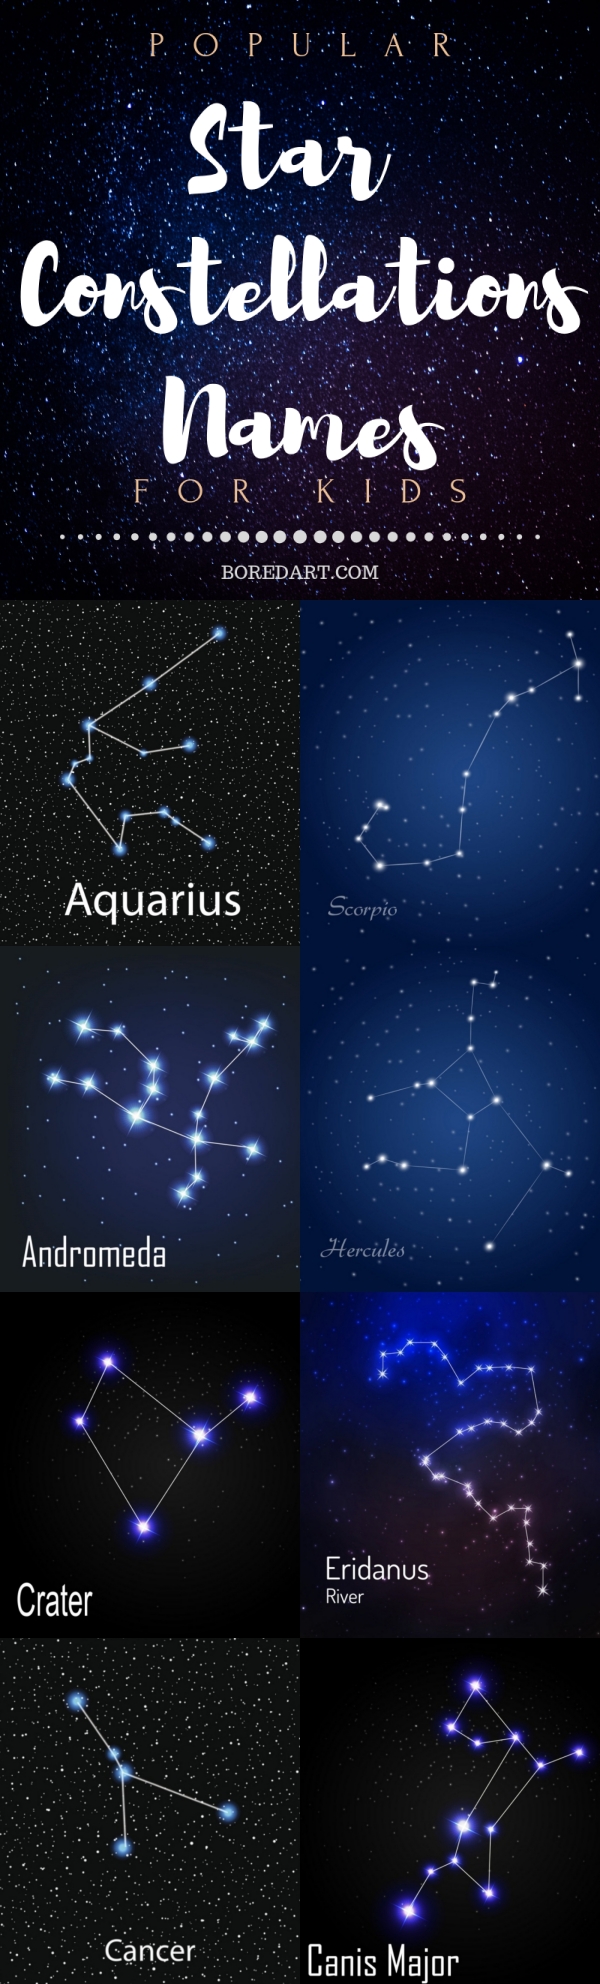 Popular Star Constellations Names For Kids First Image 